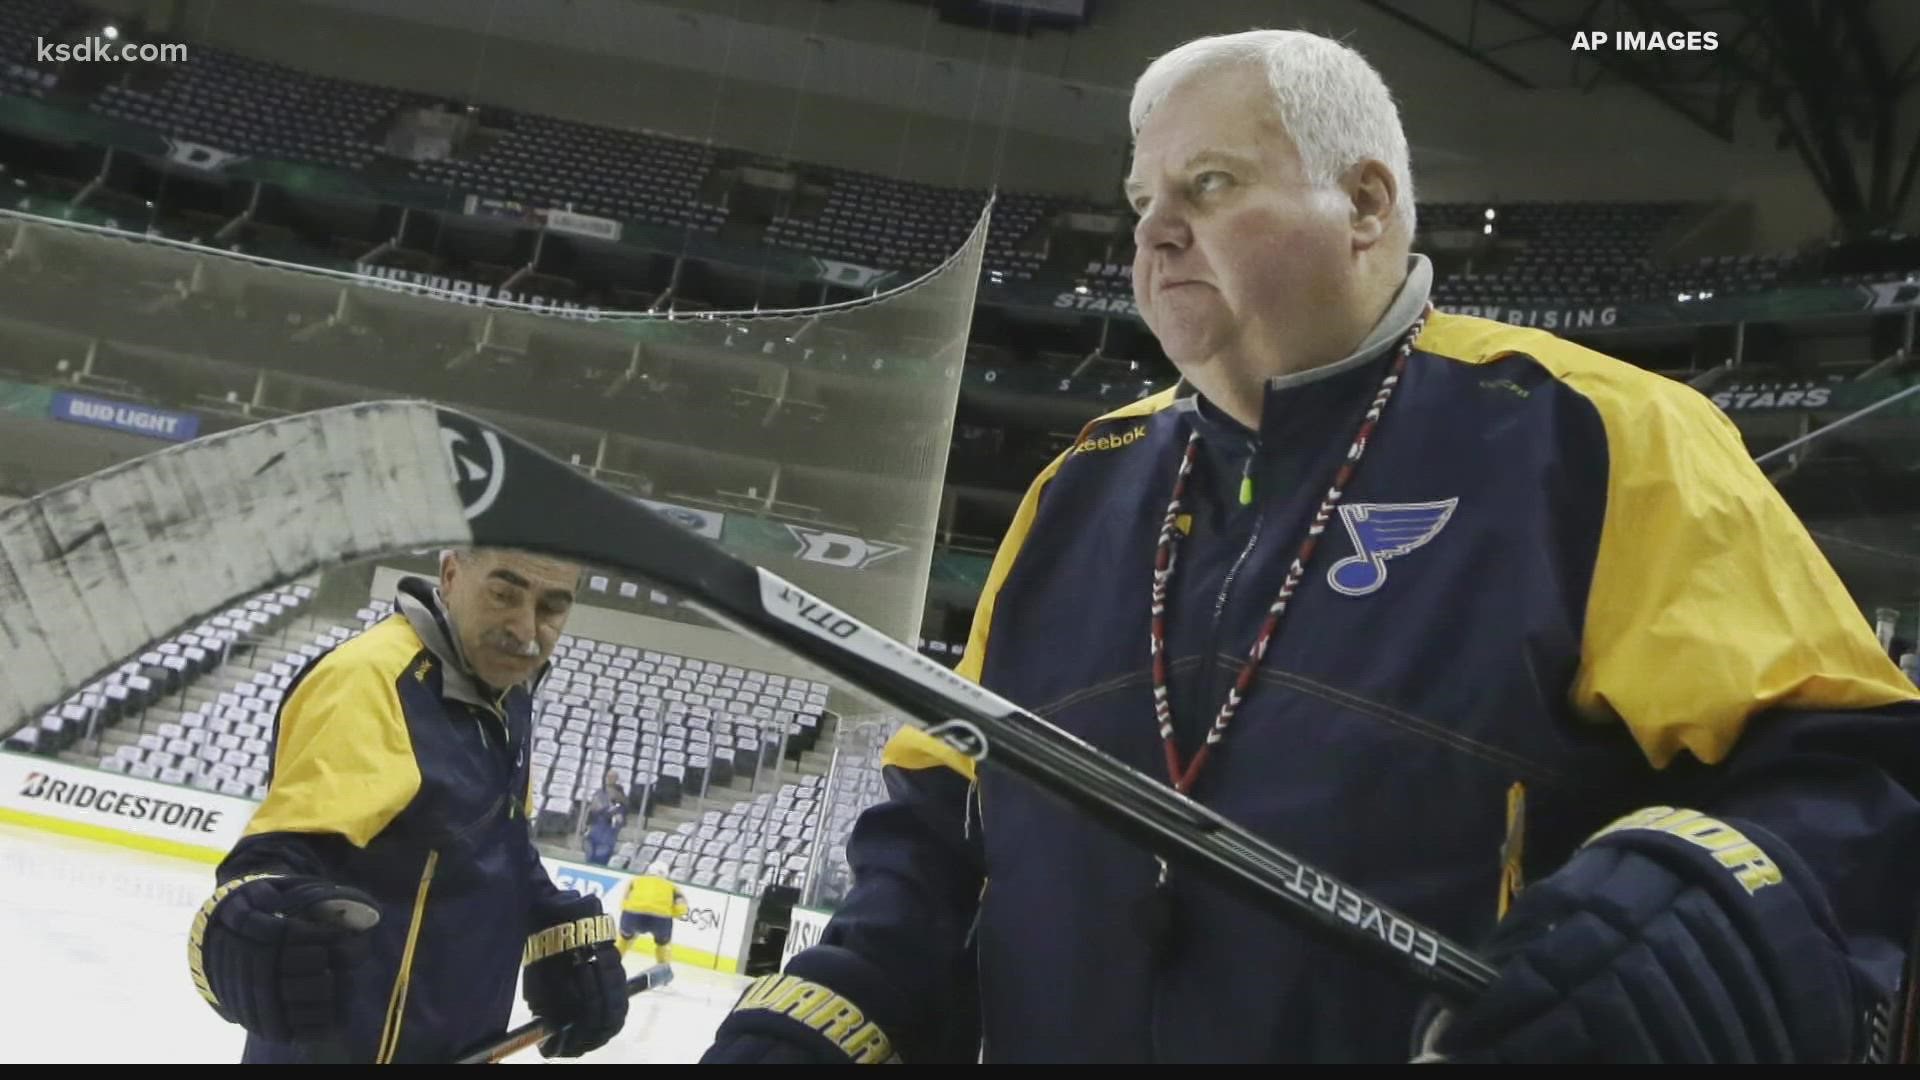 He's one of the sharpest hockey minds in the NHL. Now, he's back with the Blues.